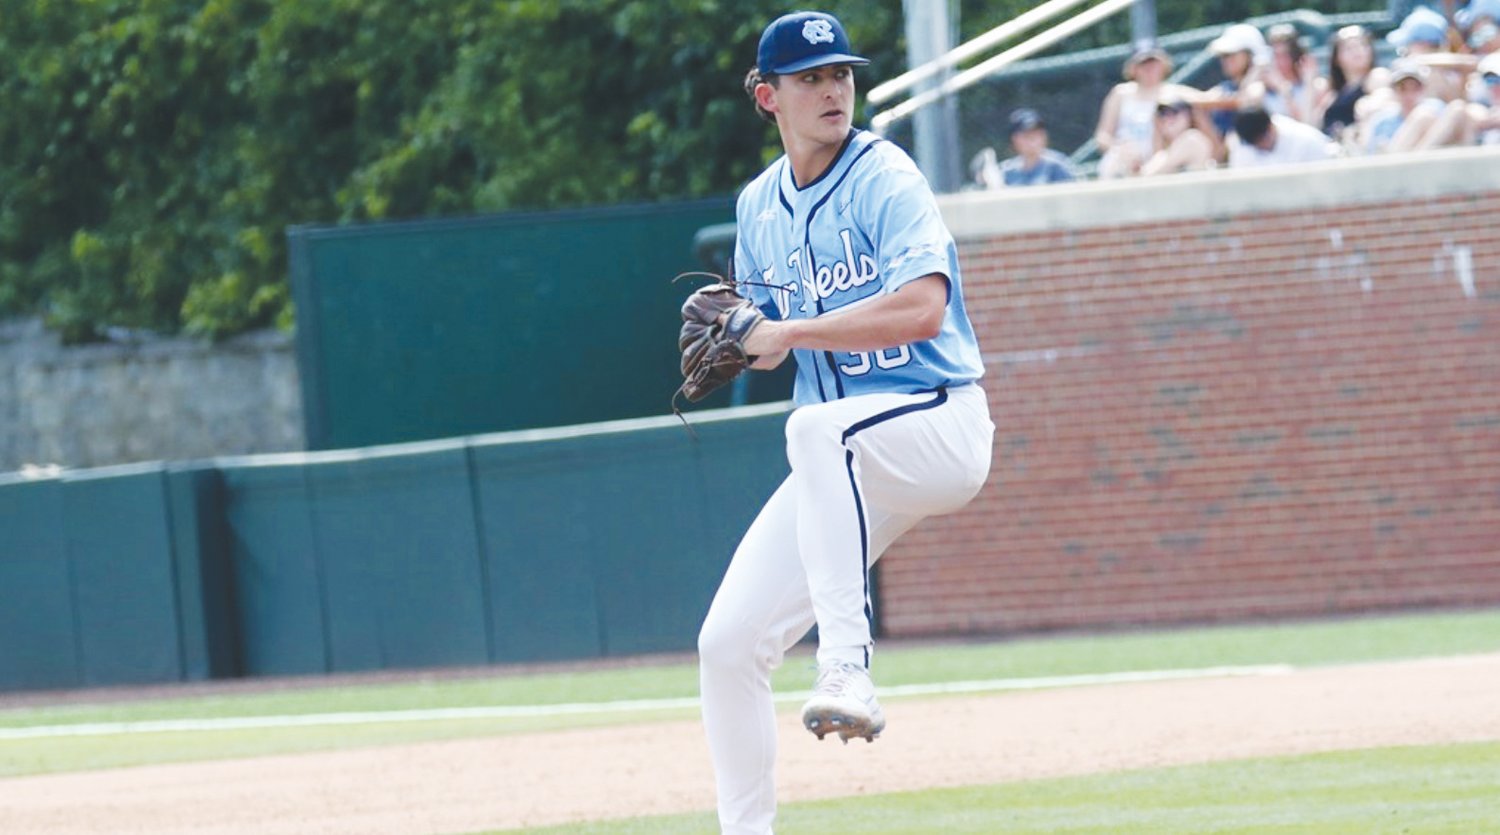 UNC reliever and Northwood graduate Davis Palermo readies himself to throw a pitch in the Tar Heels' 6-5 win over Georgia in the NCAA Chapel Hill Super Regional on June 5.